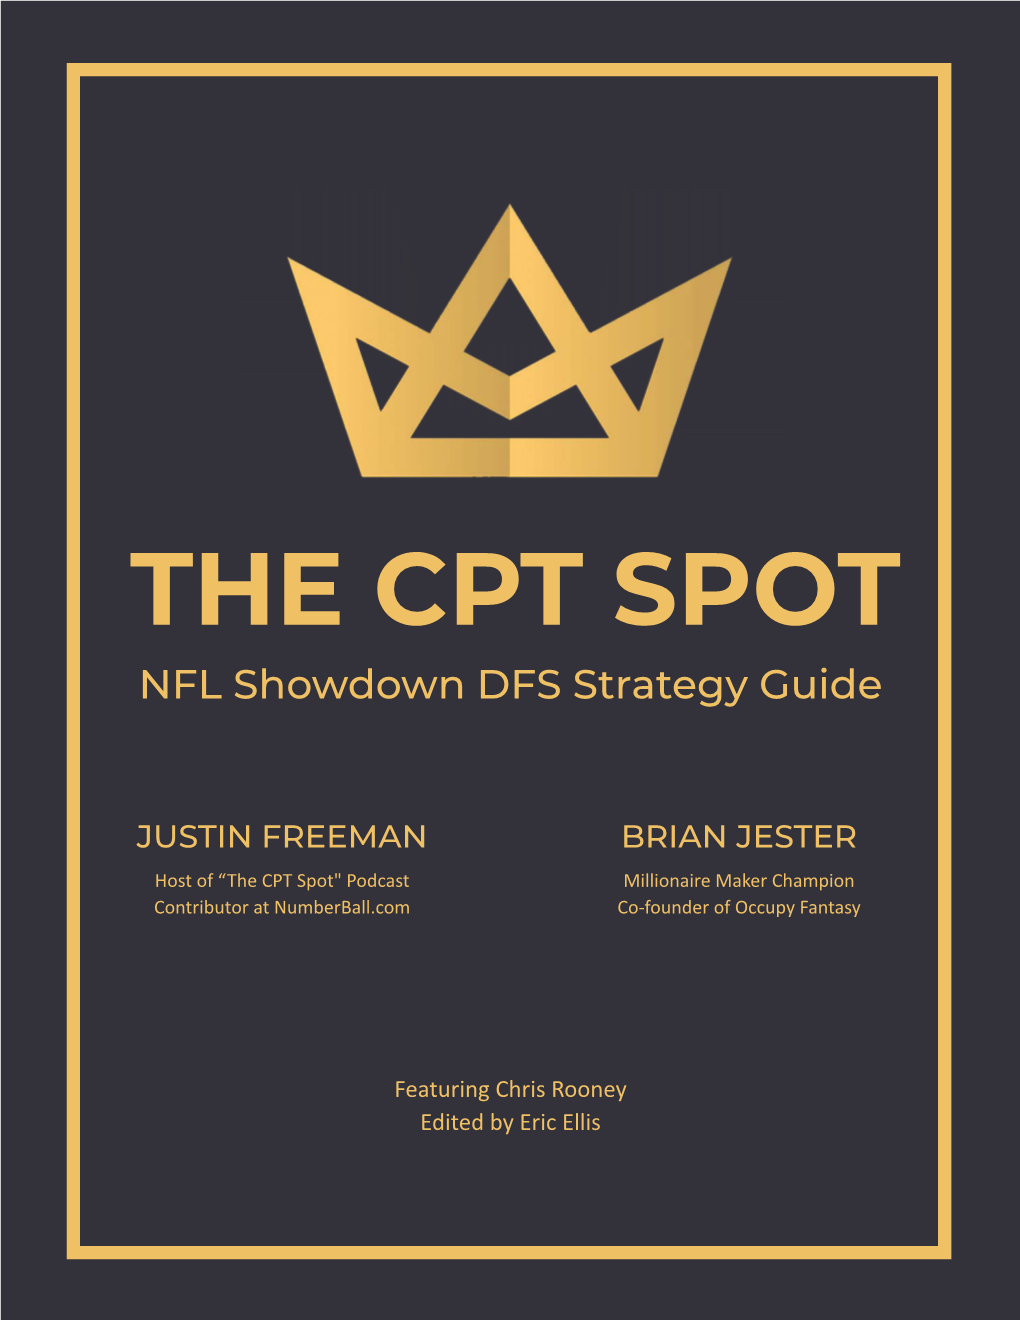 THE CPT SPOT NFL Showdown DFS Strategy Guide